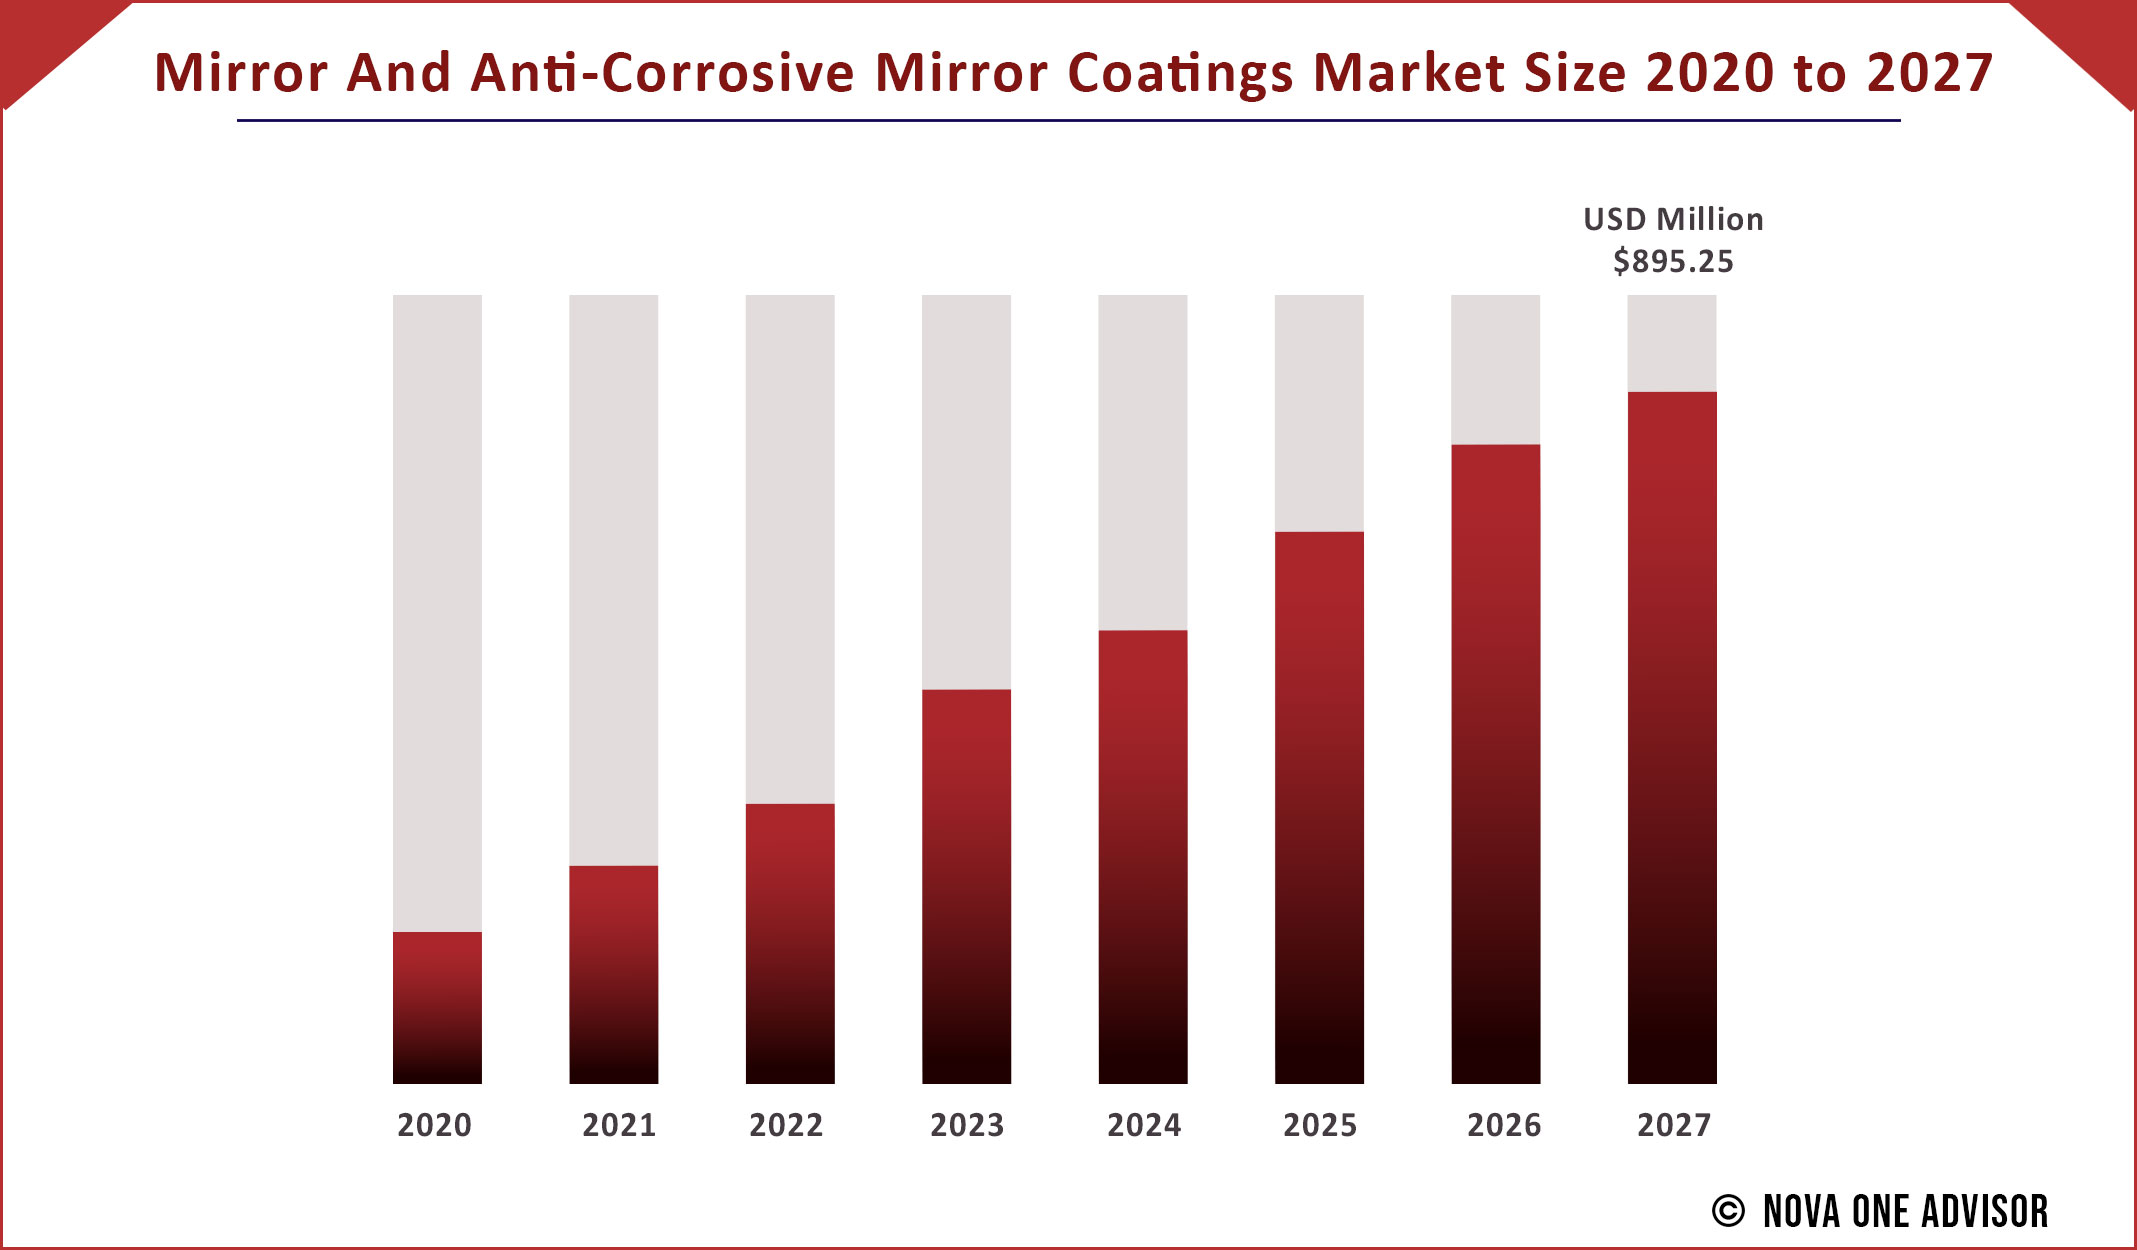 Mirror And Anti-Corrosive Mirror Coatings Market Size 2020 to 2027